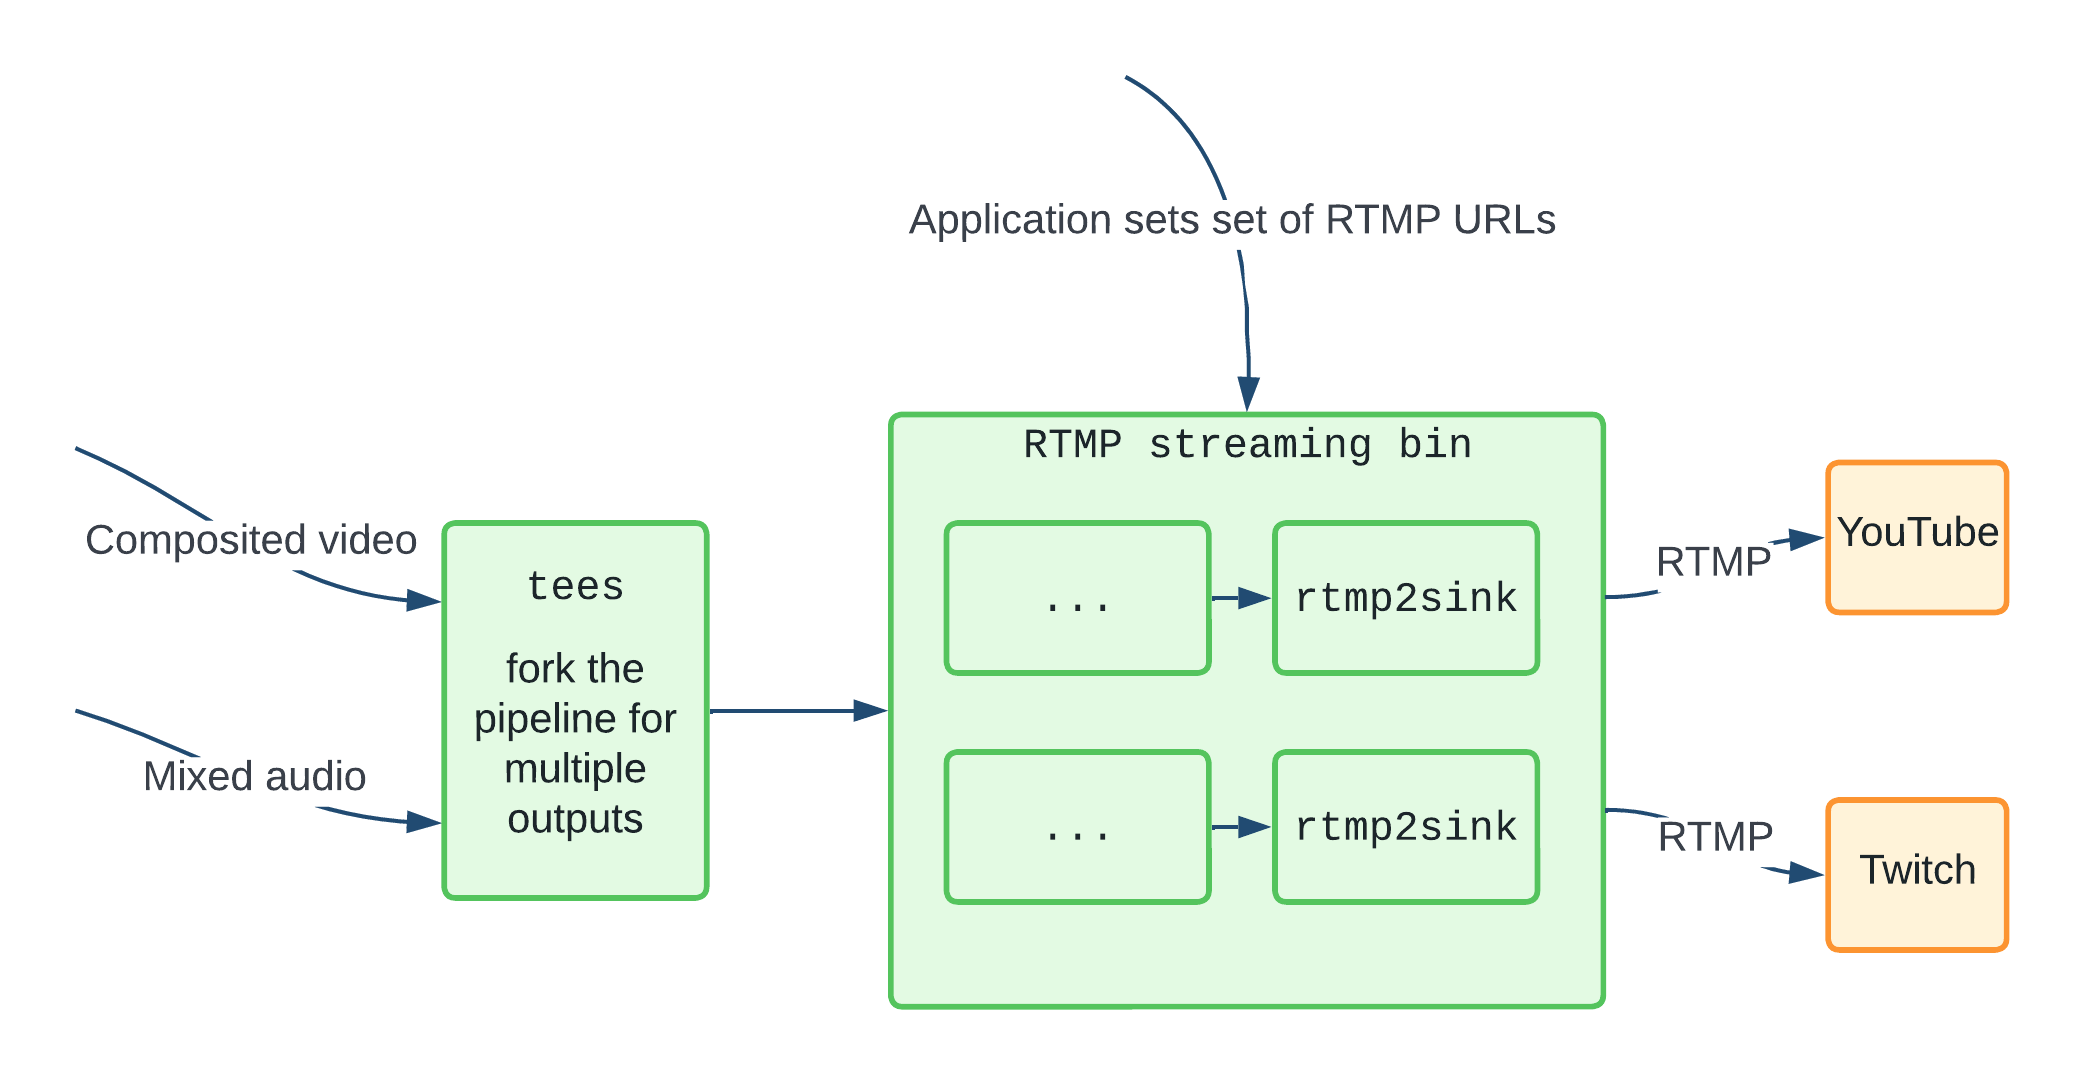 Rough illustration of an RTMP streaming bin's components